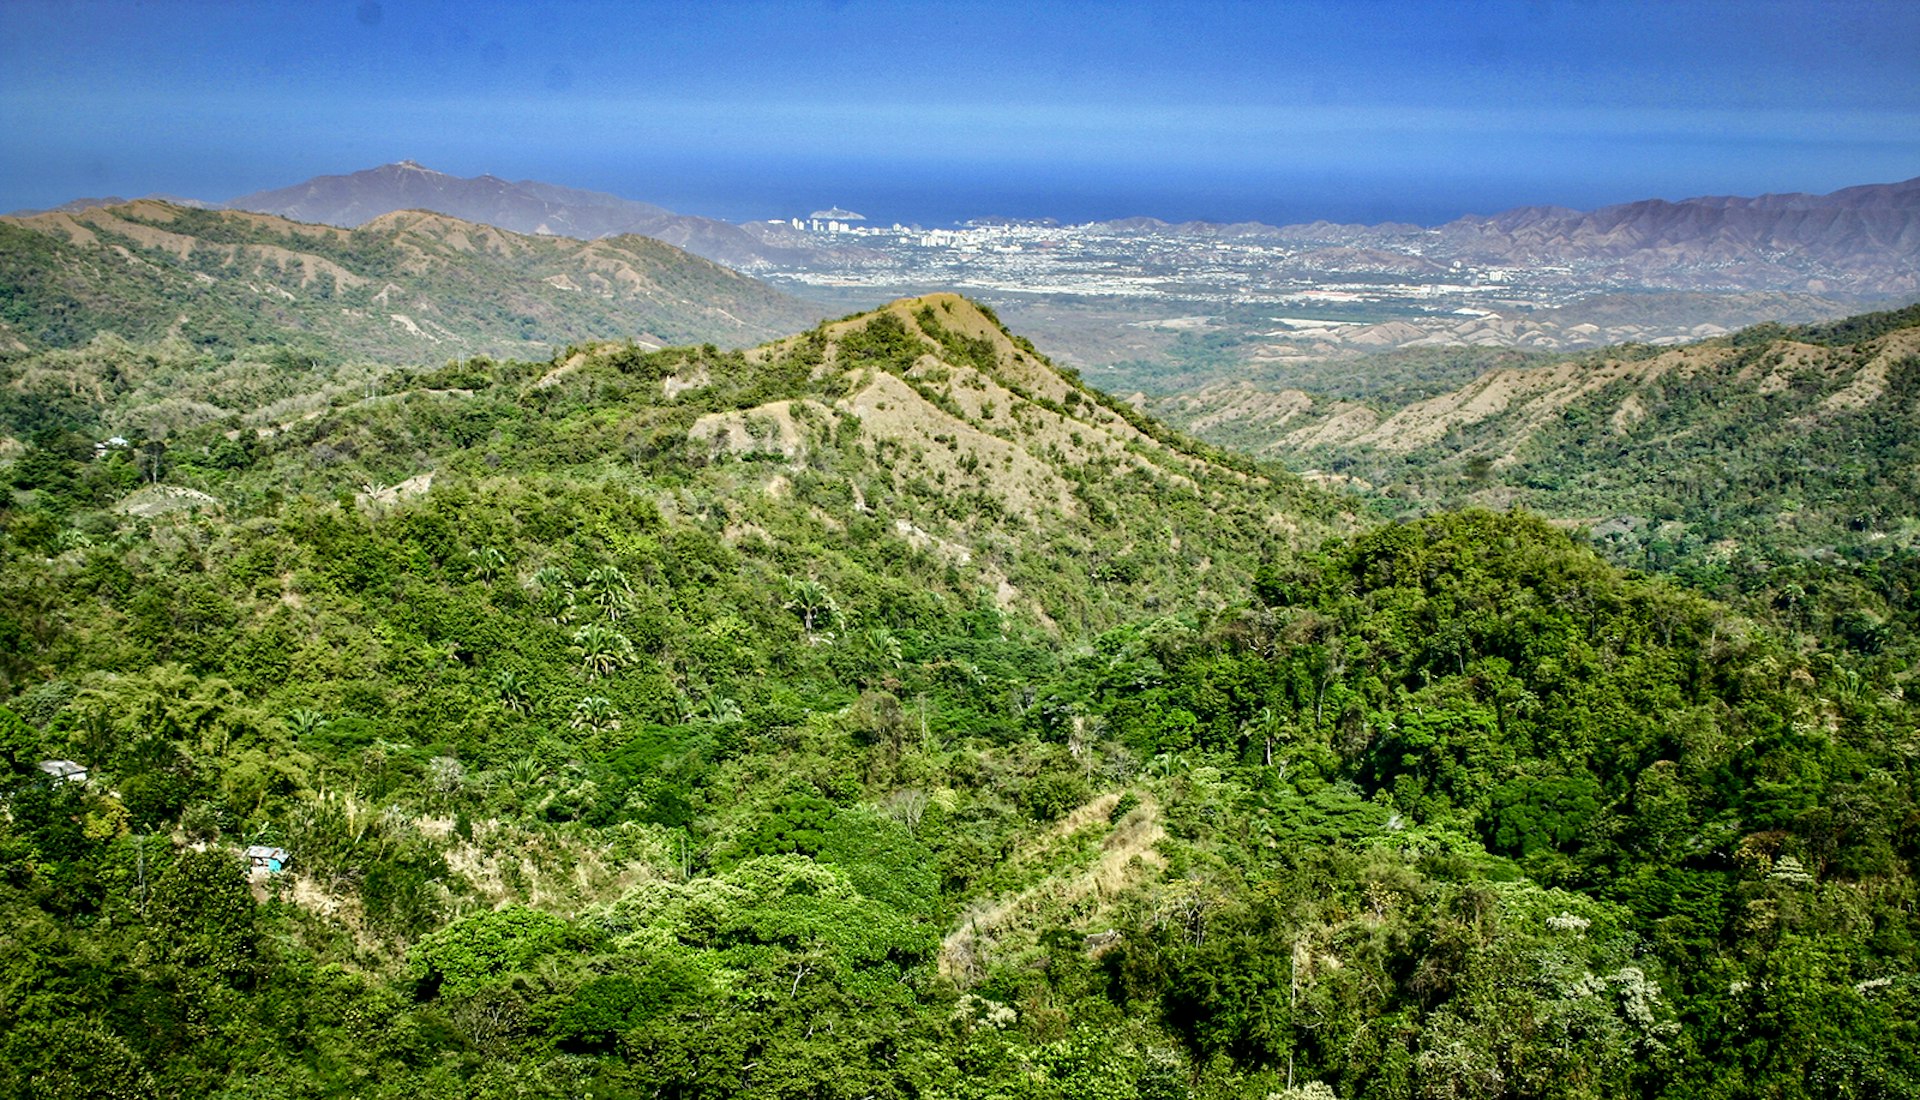 A view of green hills with Santa Marta far away in the background